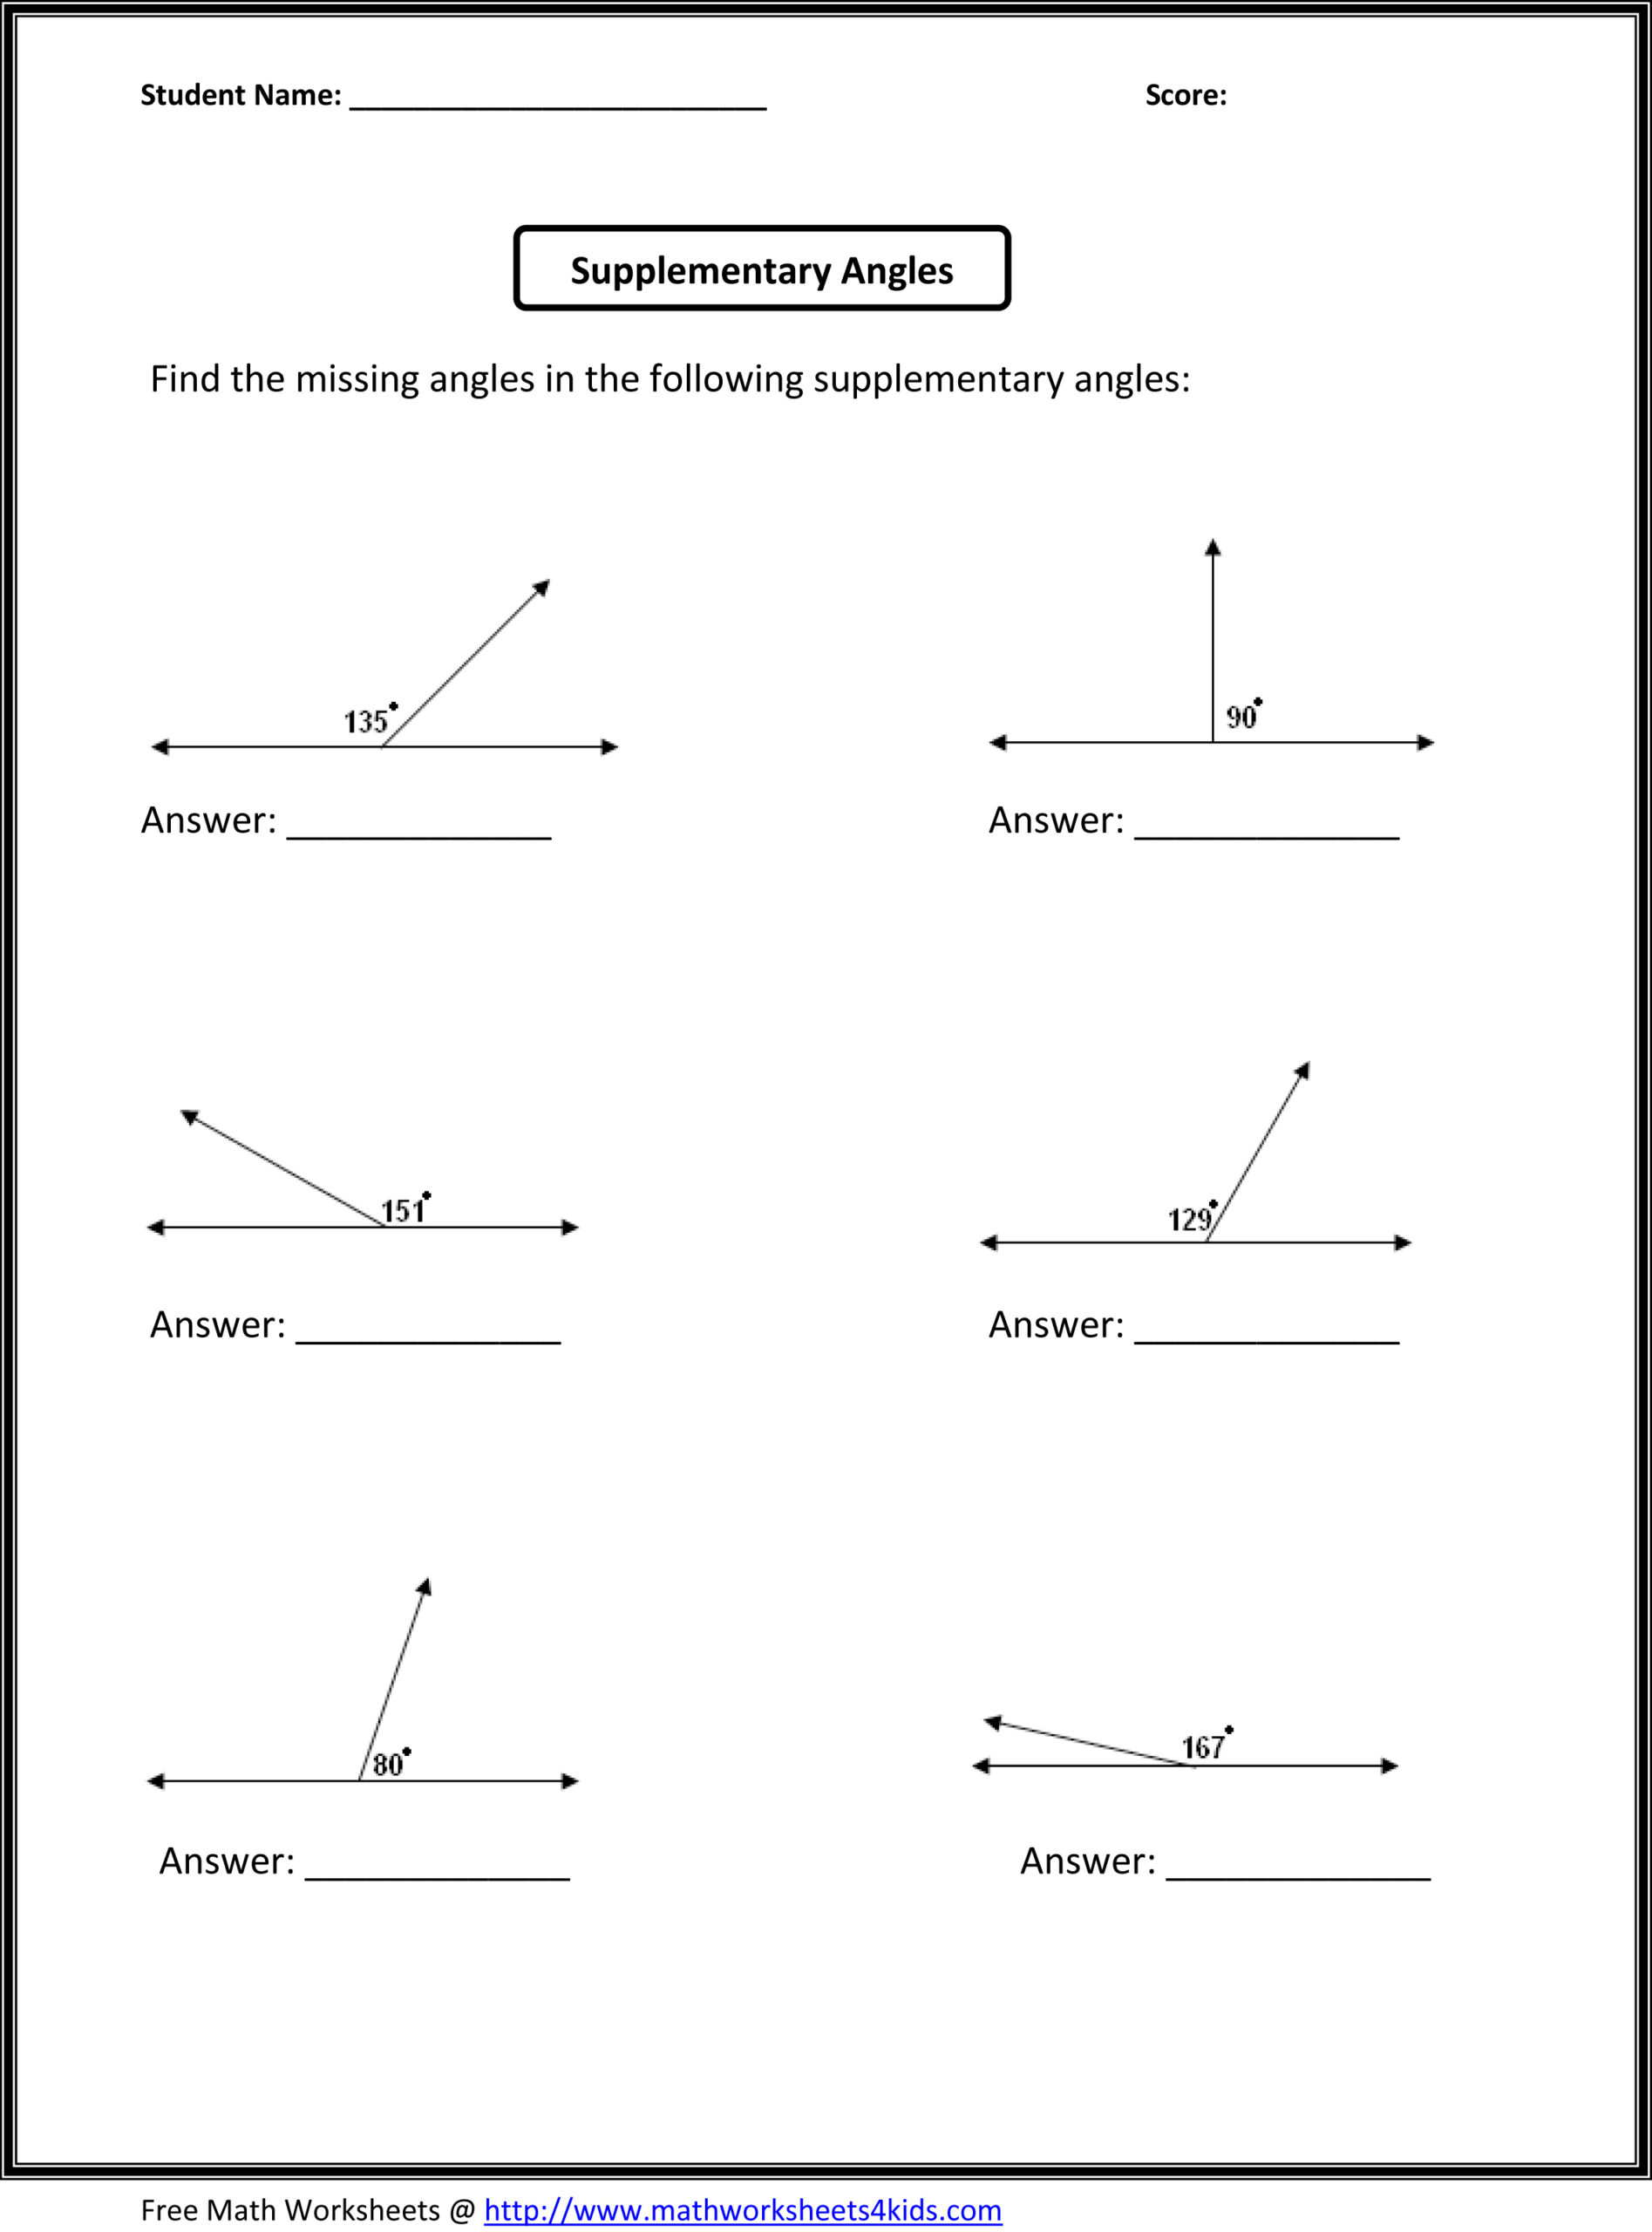 17 Best Images Of Geometry Angles Worksheet 4th Grade 